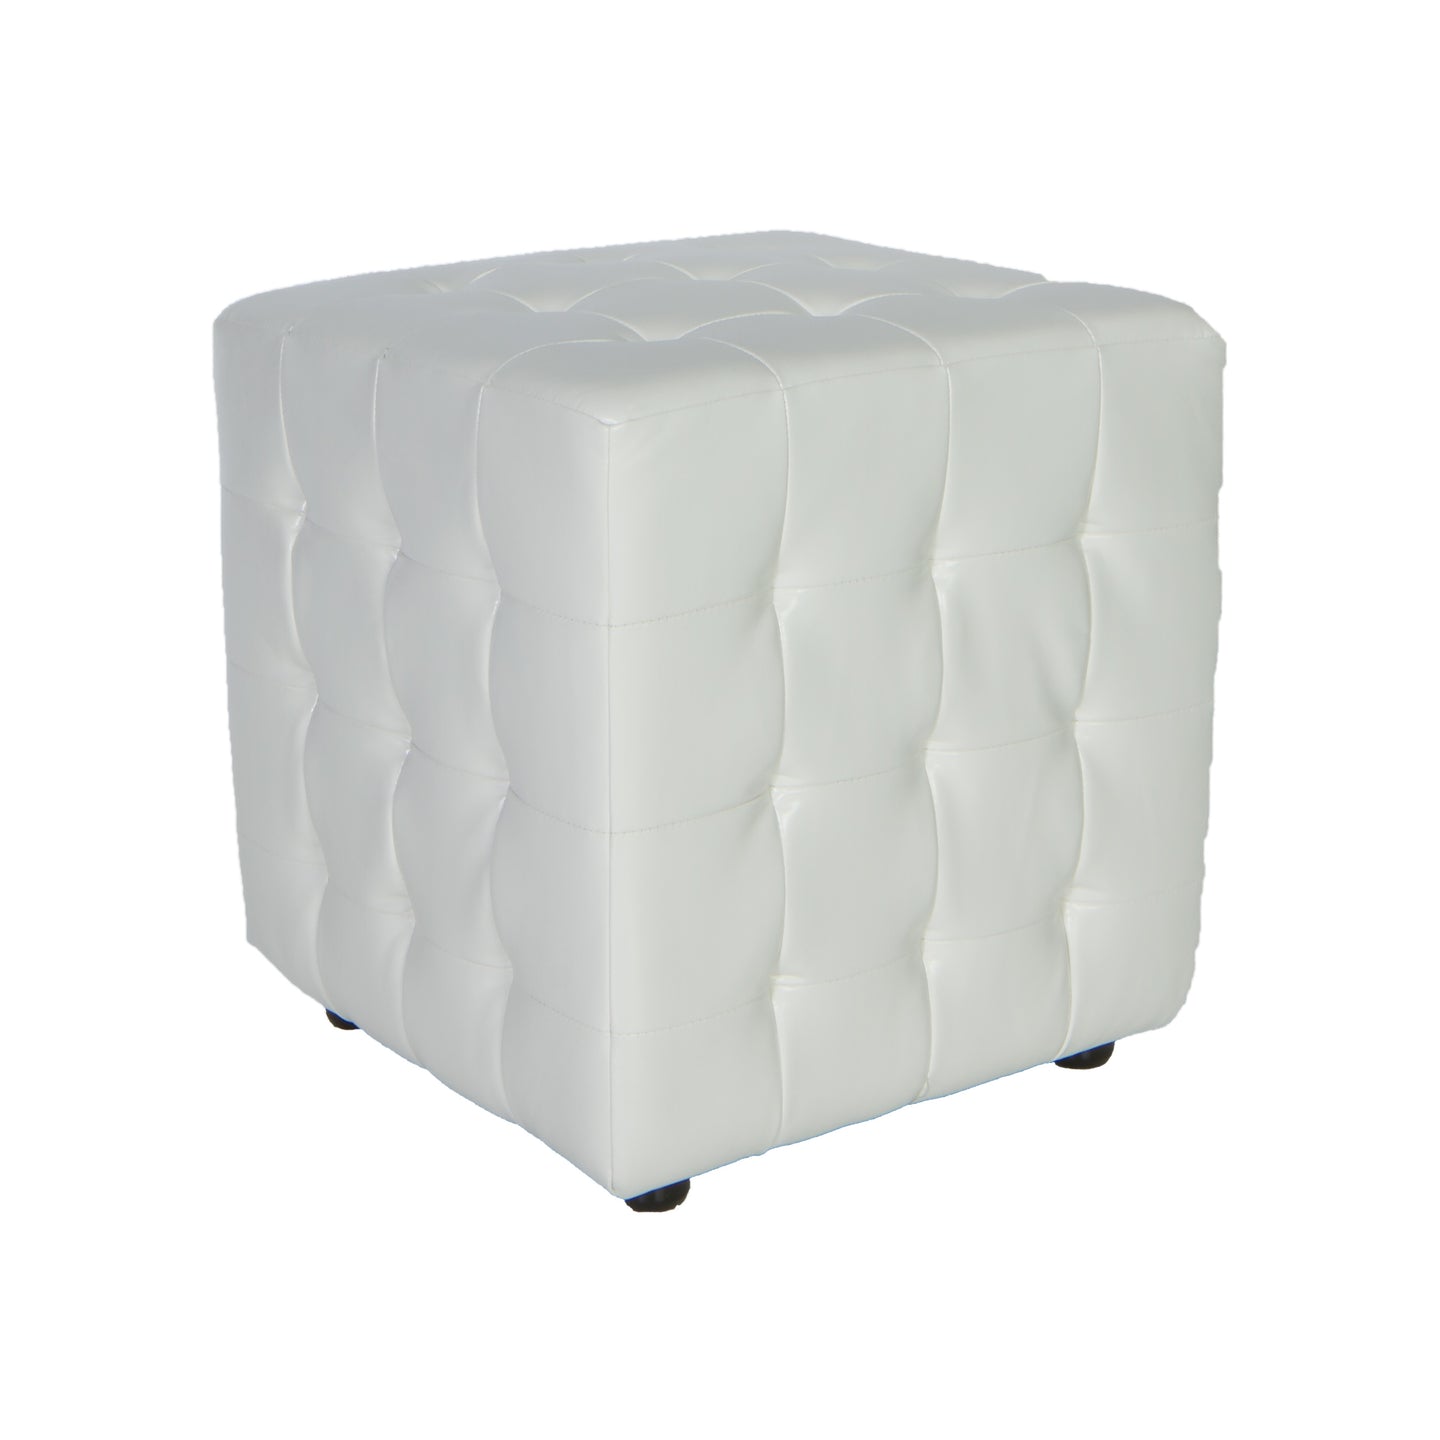 Cortesi Home Izzo Tufted Cube Ottoman in Pure White Bonded Leather